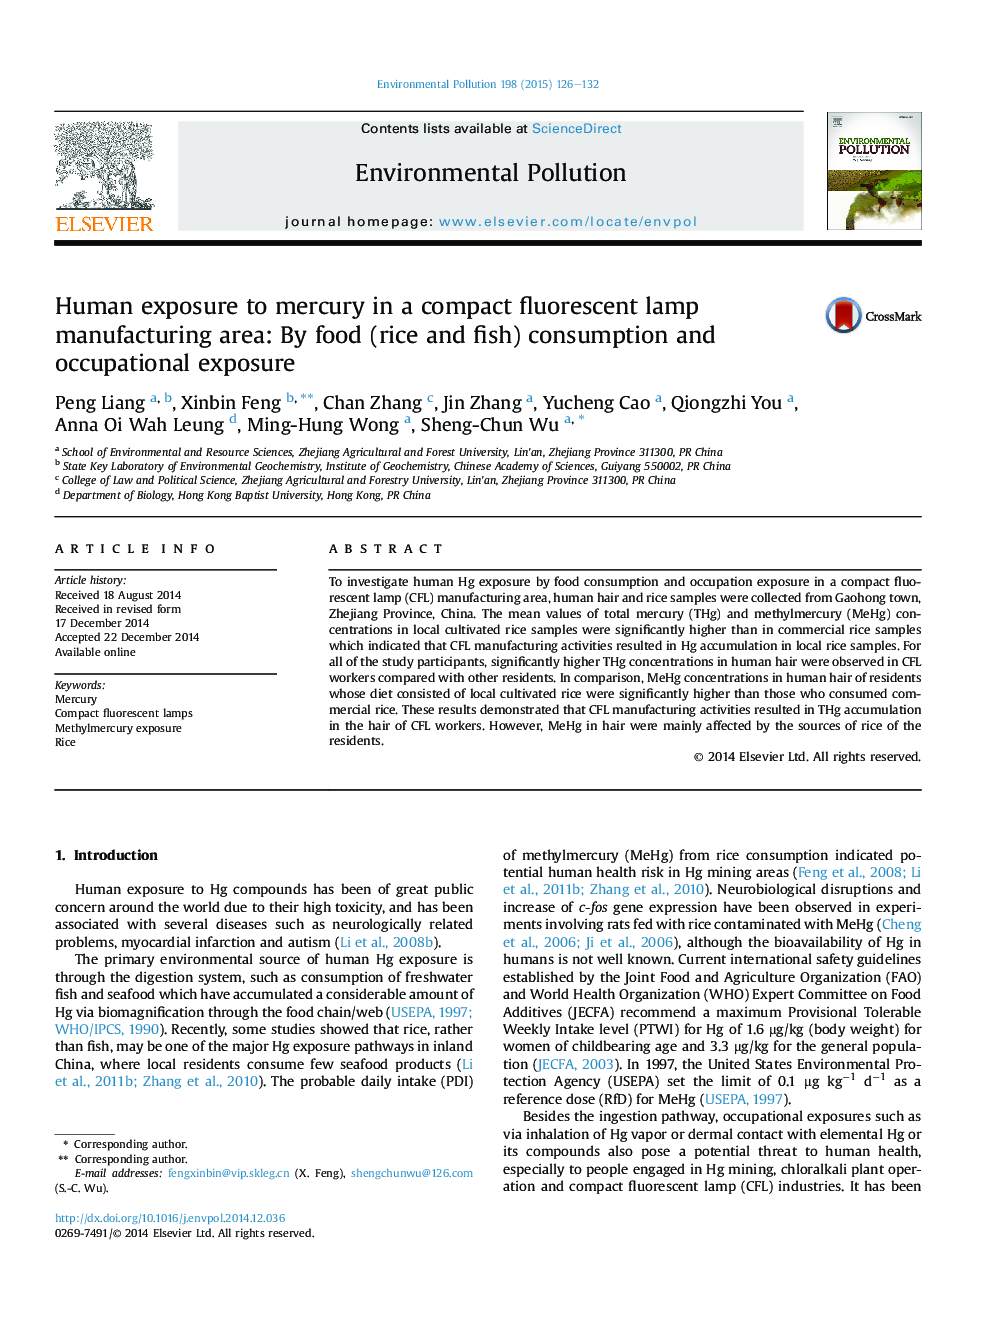 Human exposure to mercury in a compact fluorescent lamp manufacturing area: By food (rice and fish) consumption and occupational exposure